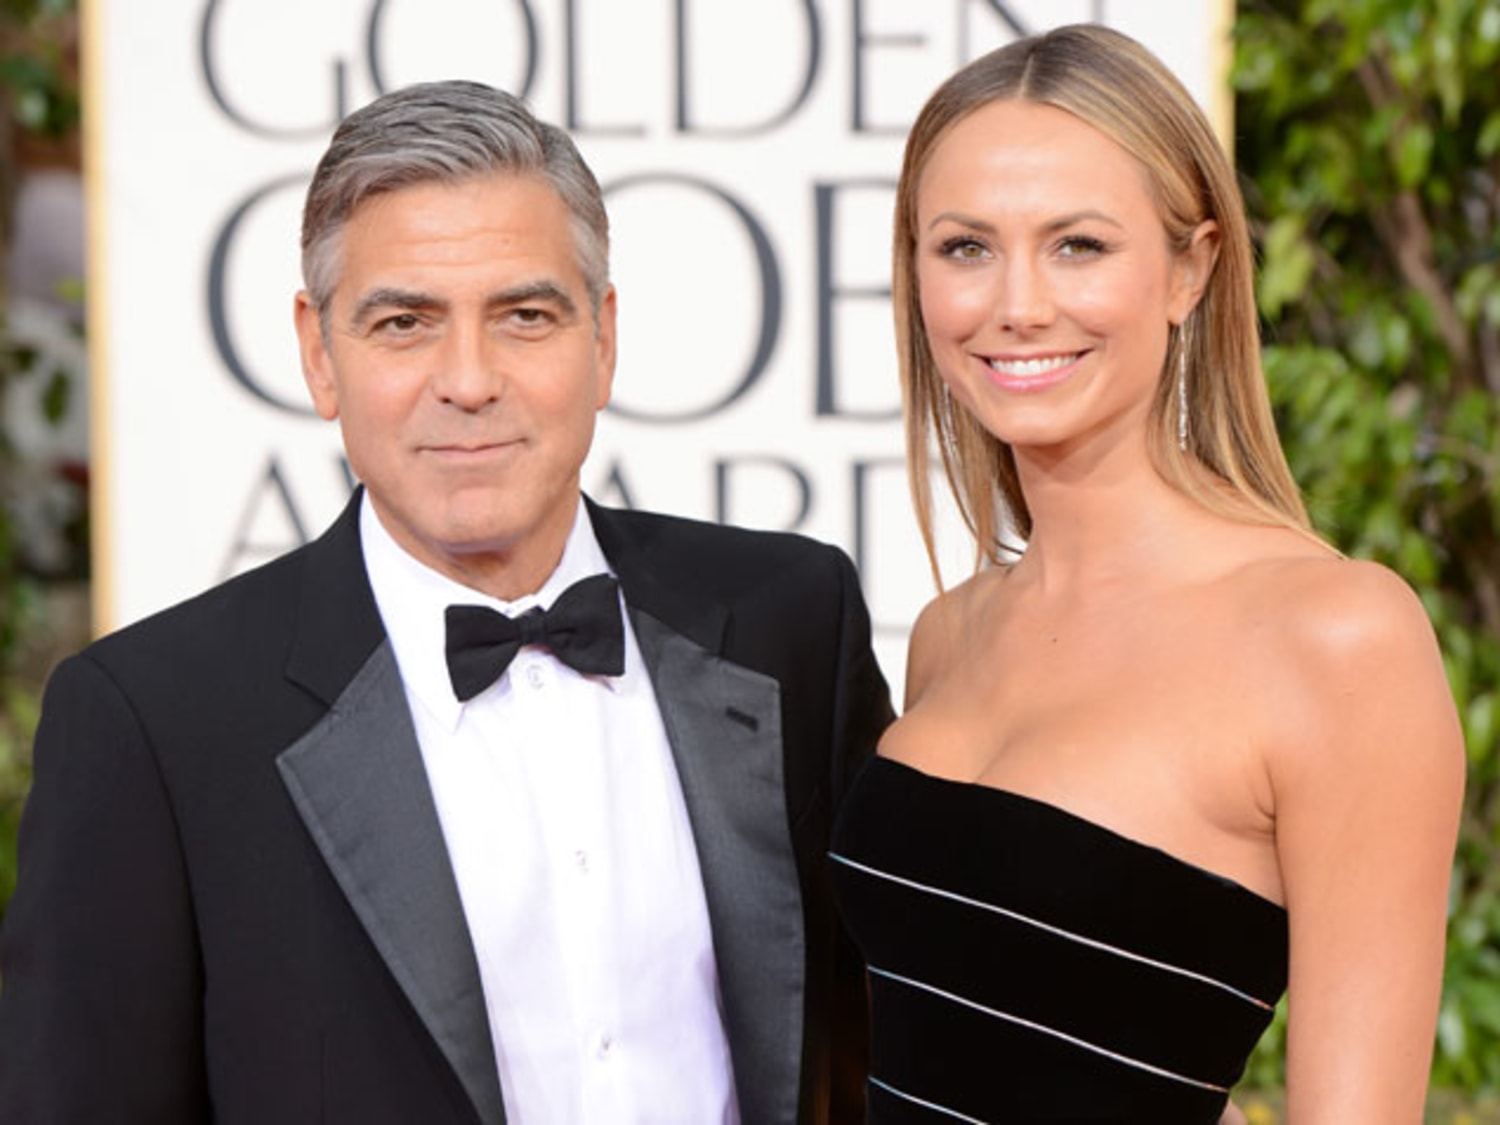 George Clooney and Stacy Keibler Split: Will He Ever Get Married?